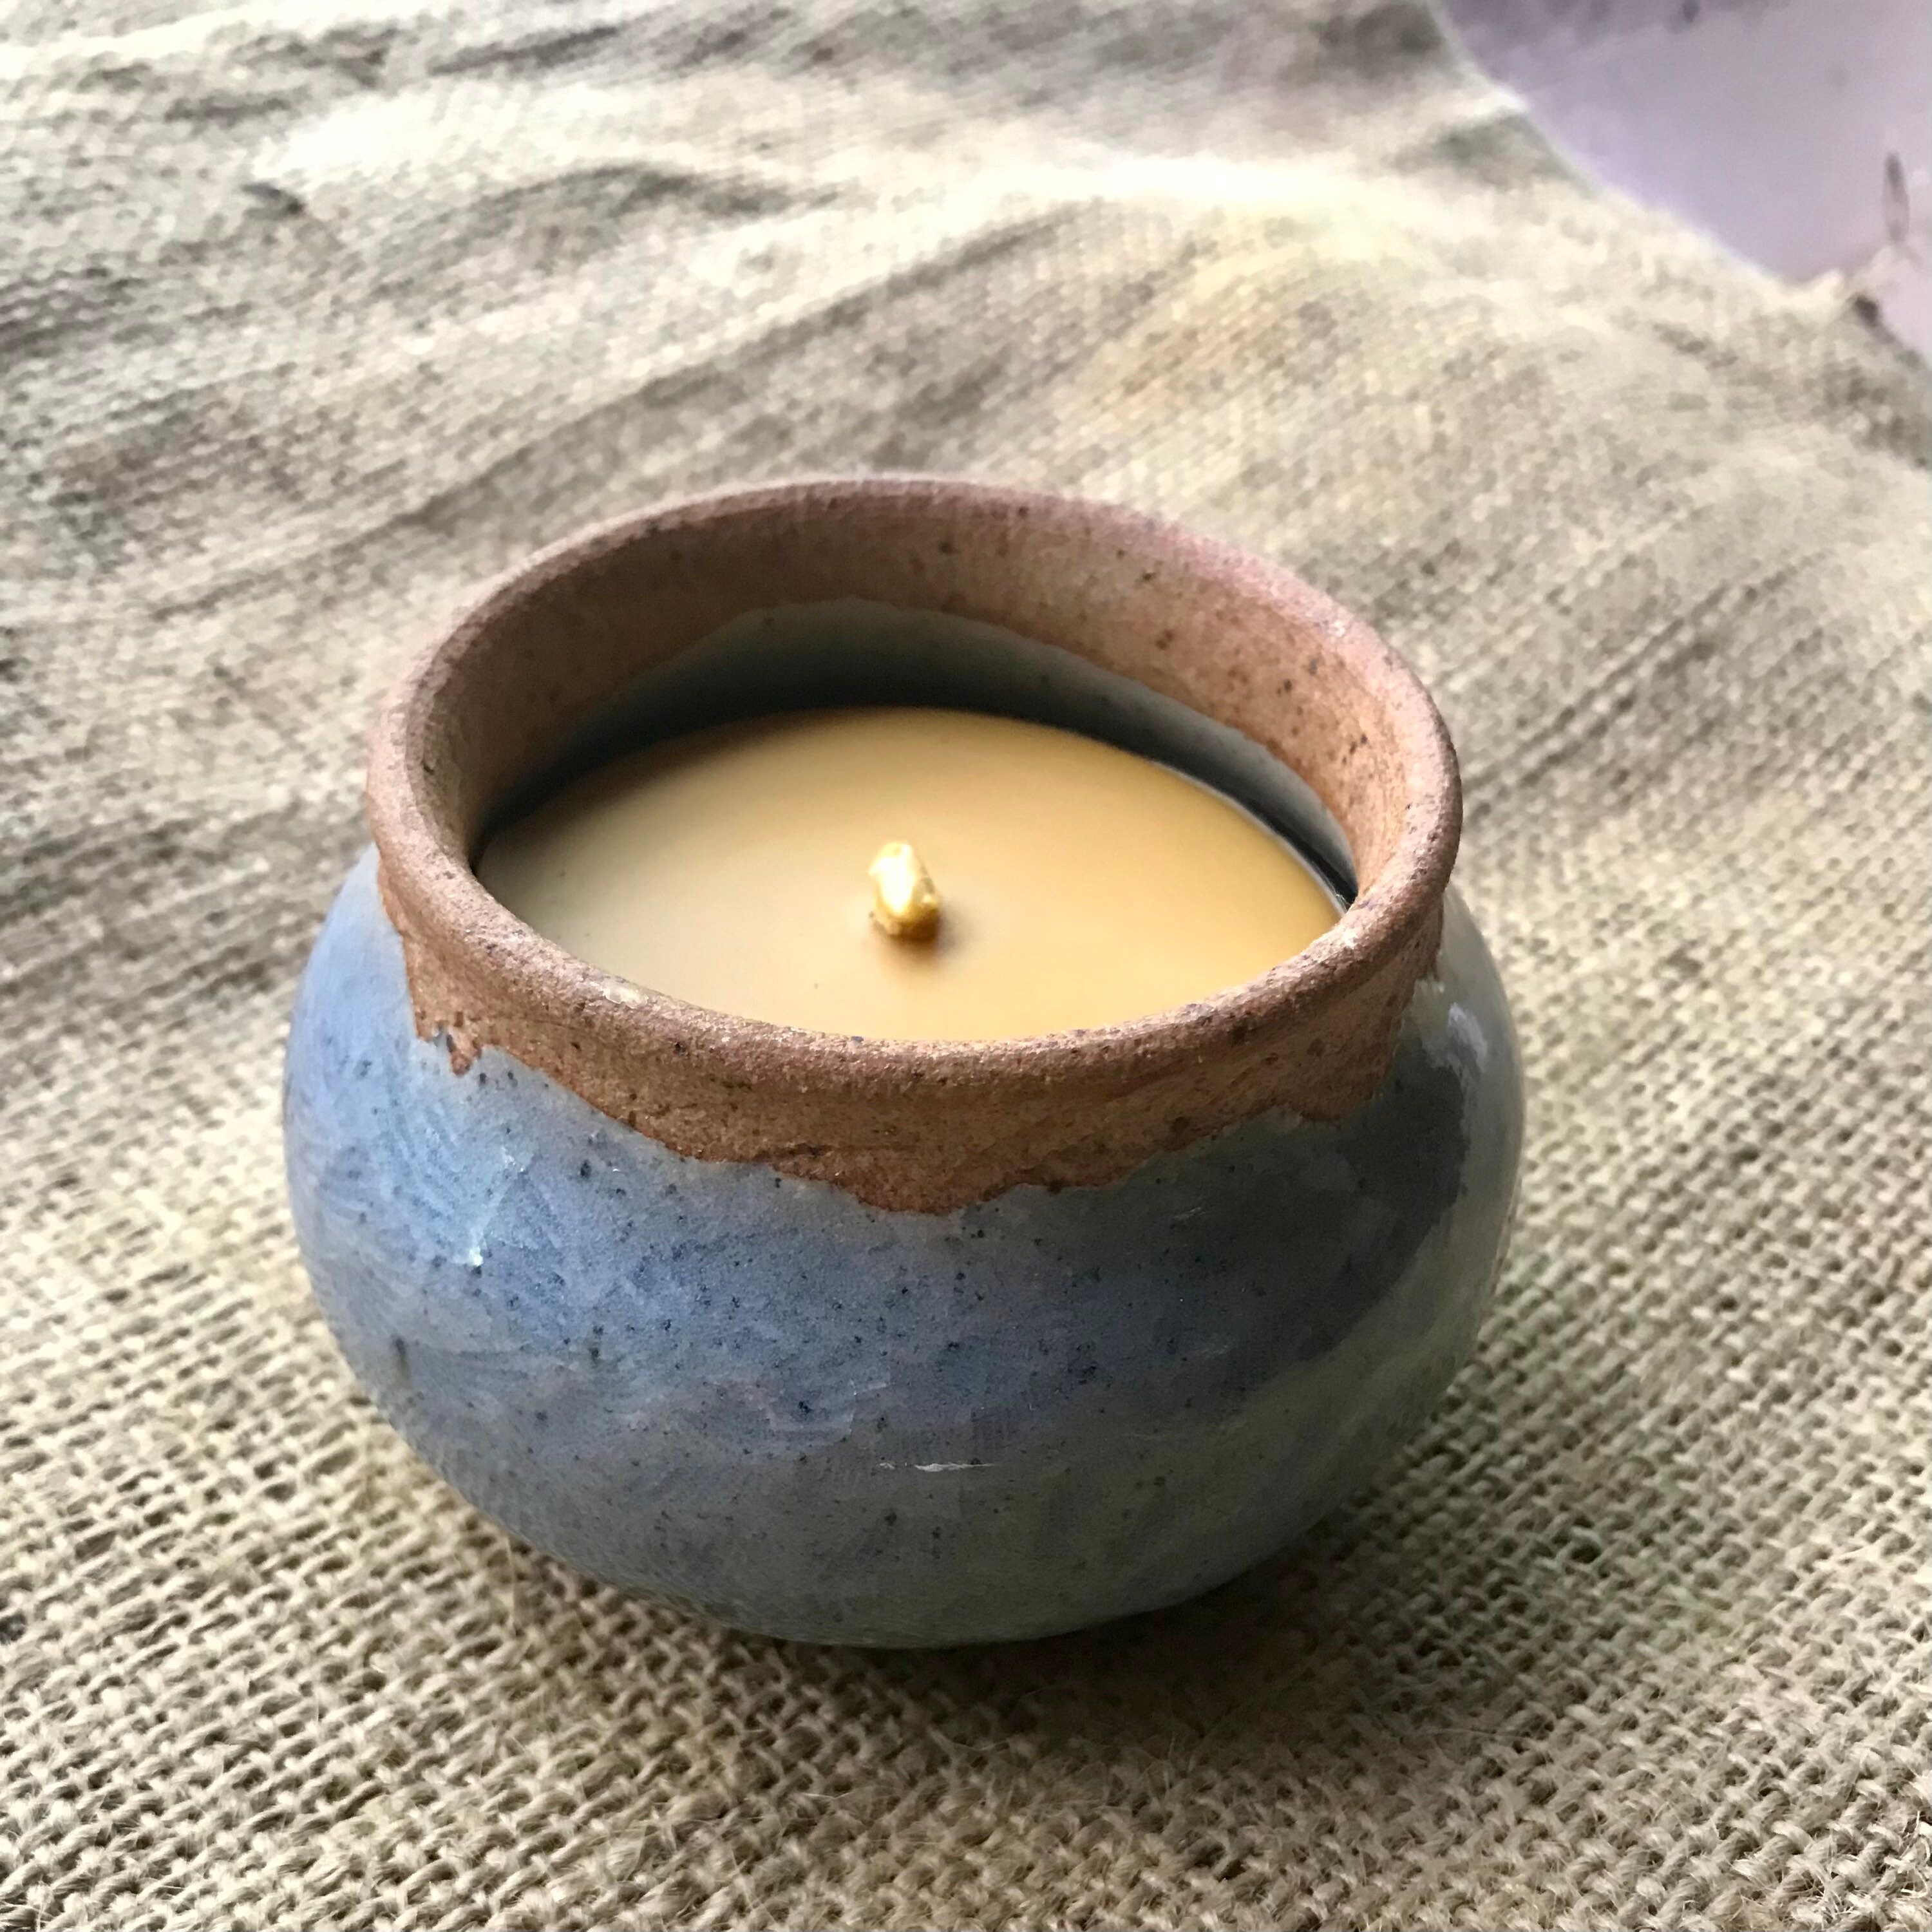 Soy Candle in Handmade Pottery, Vanilla Scented, Eco-friendly Stoneware Ceramic  Candle, Blue Home Decor, Soy Wax Candle in a Jar, Under 30 